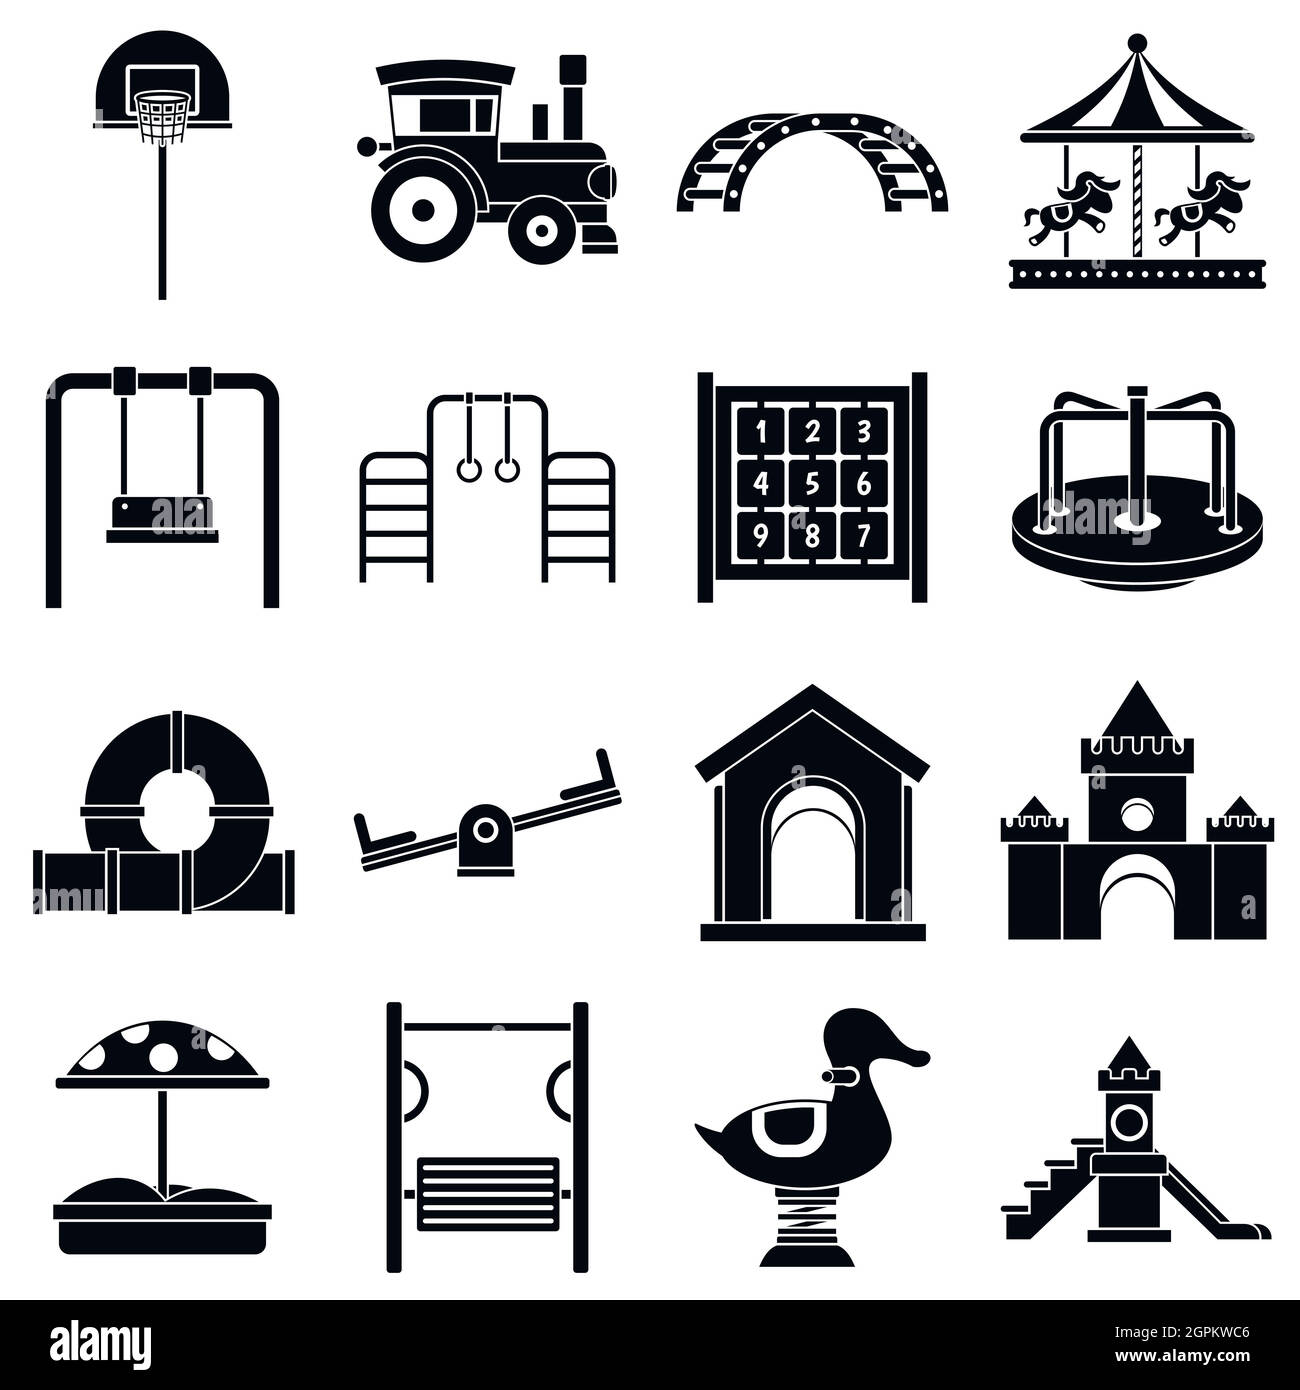 Playground icons set, simple style Stock Vector